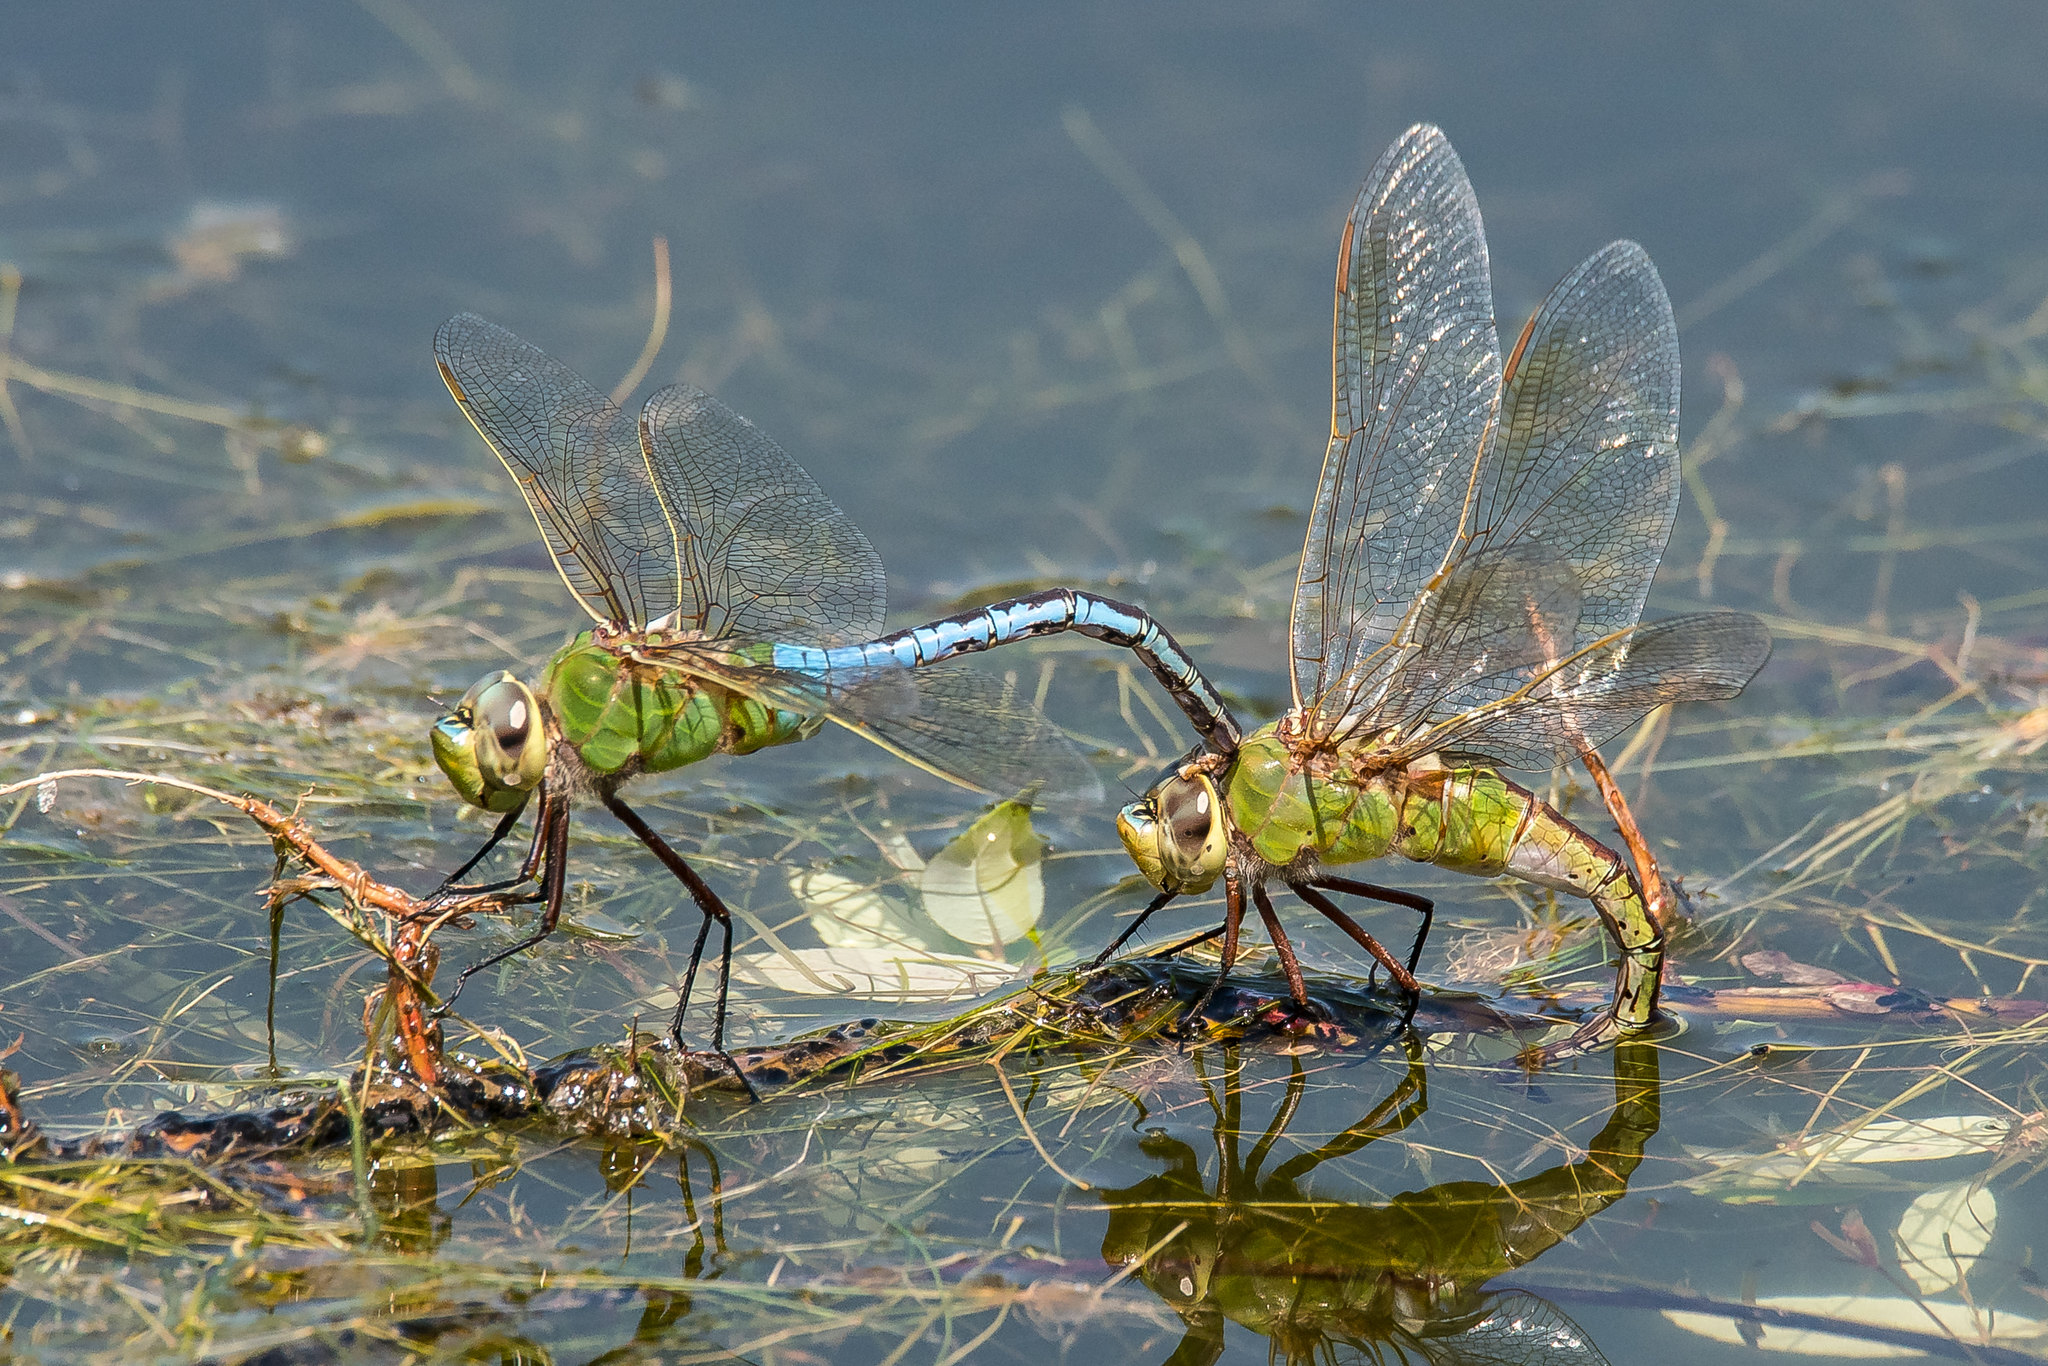 Insuring the next generation of Dragonflies